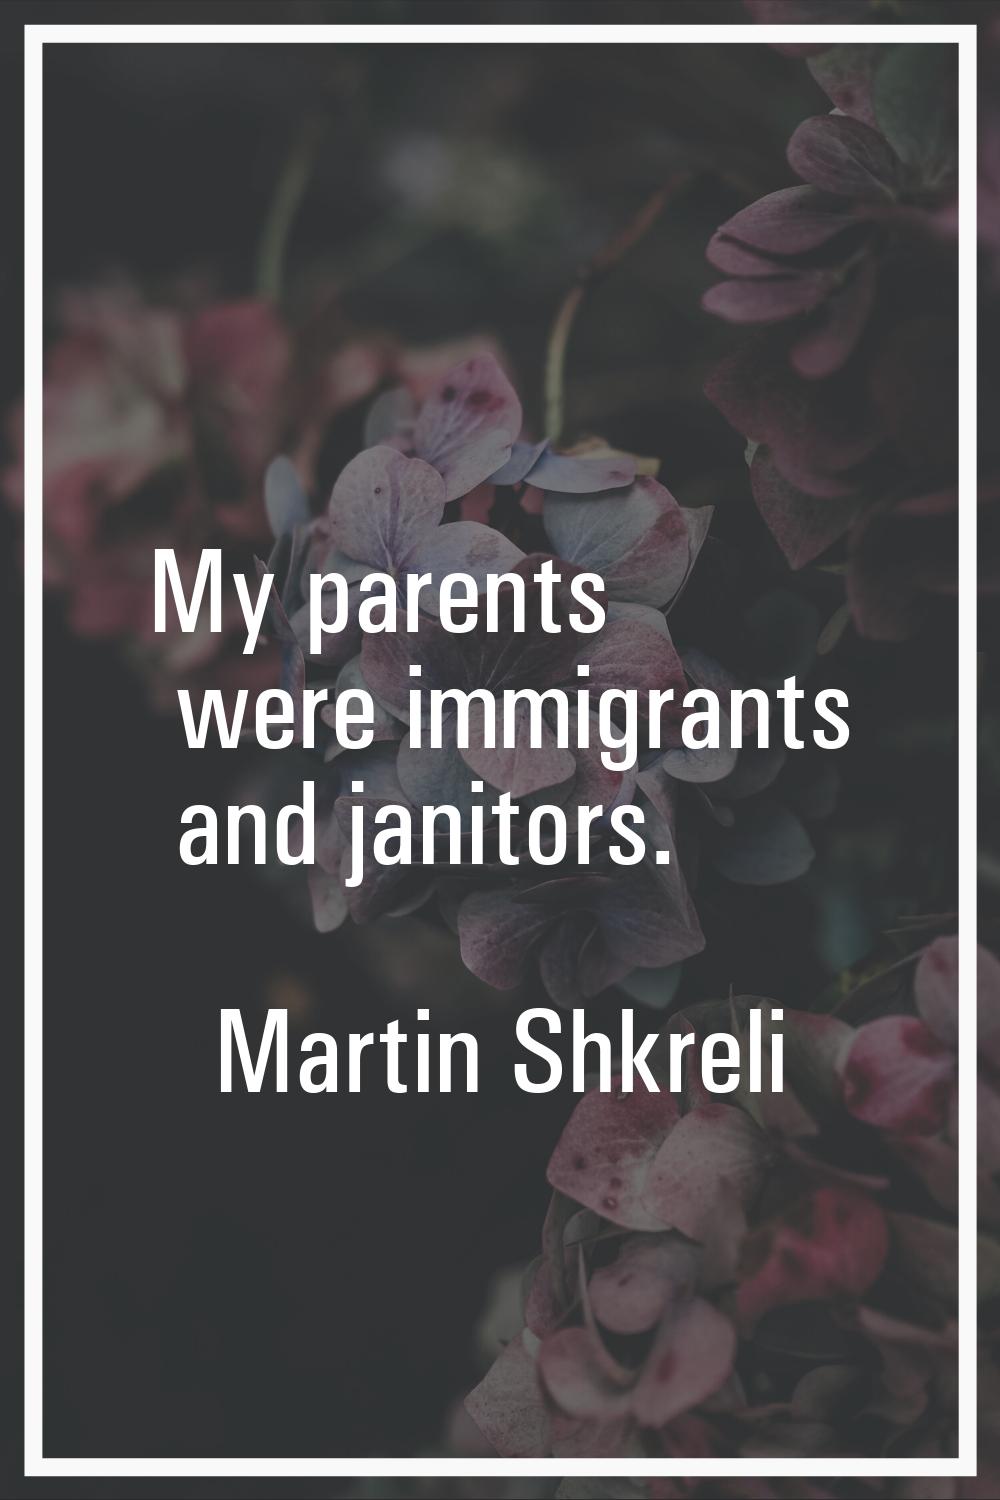 My parents were immigrants and janitors.